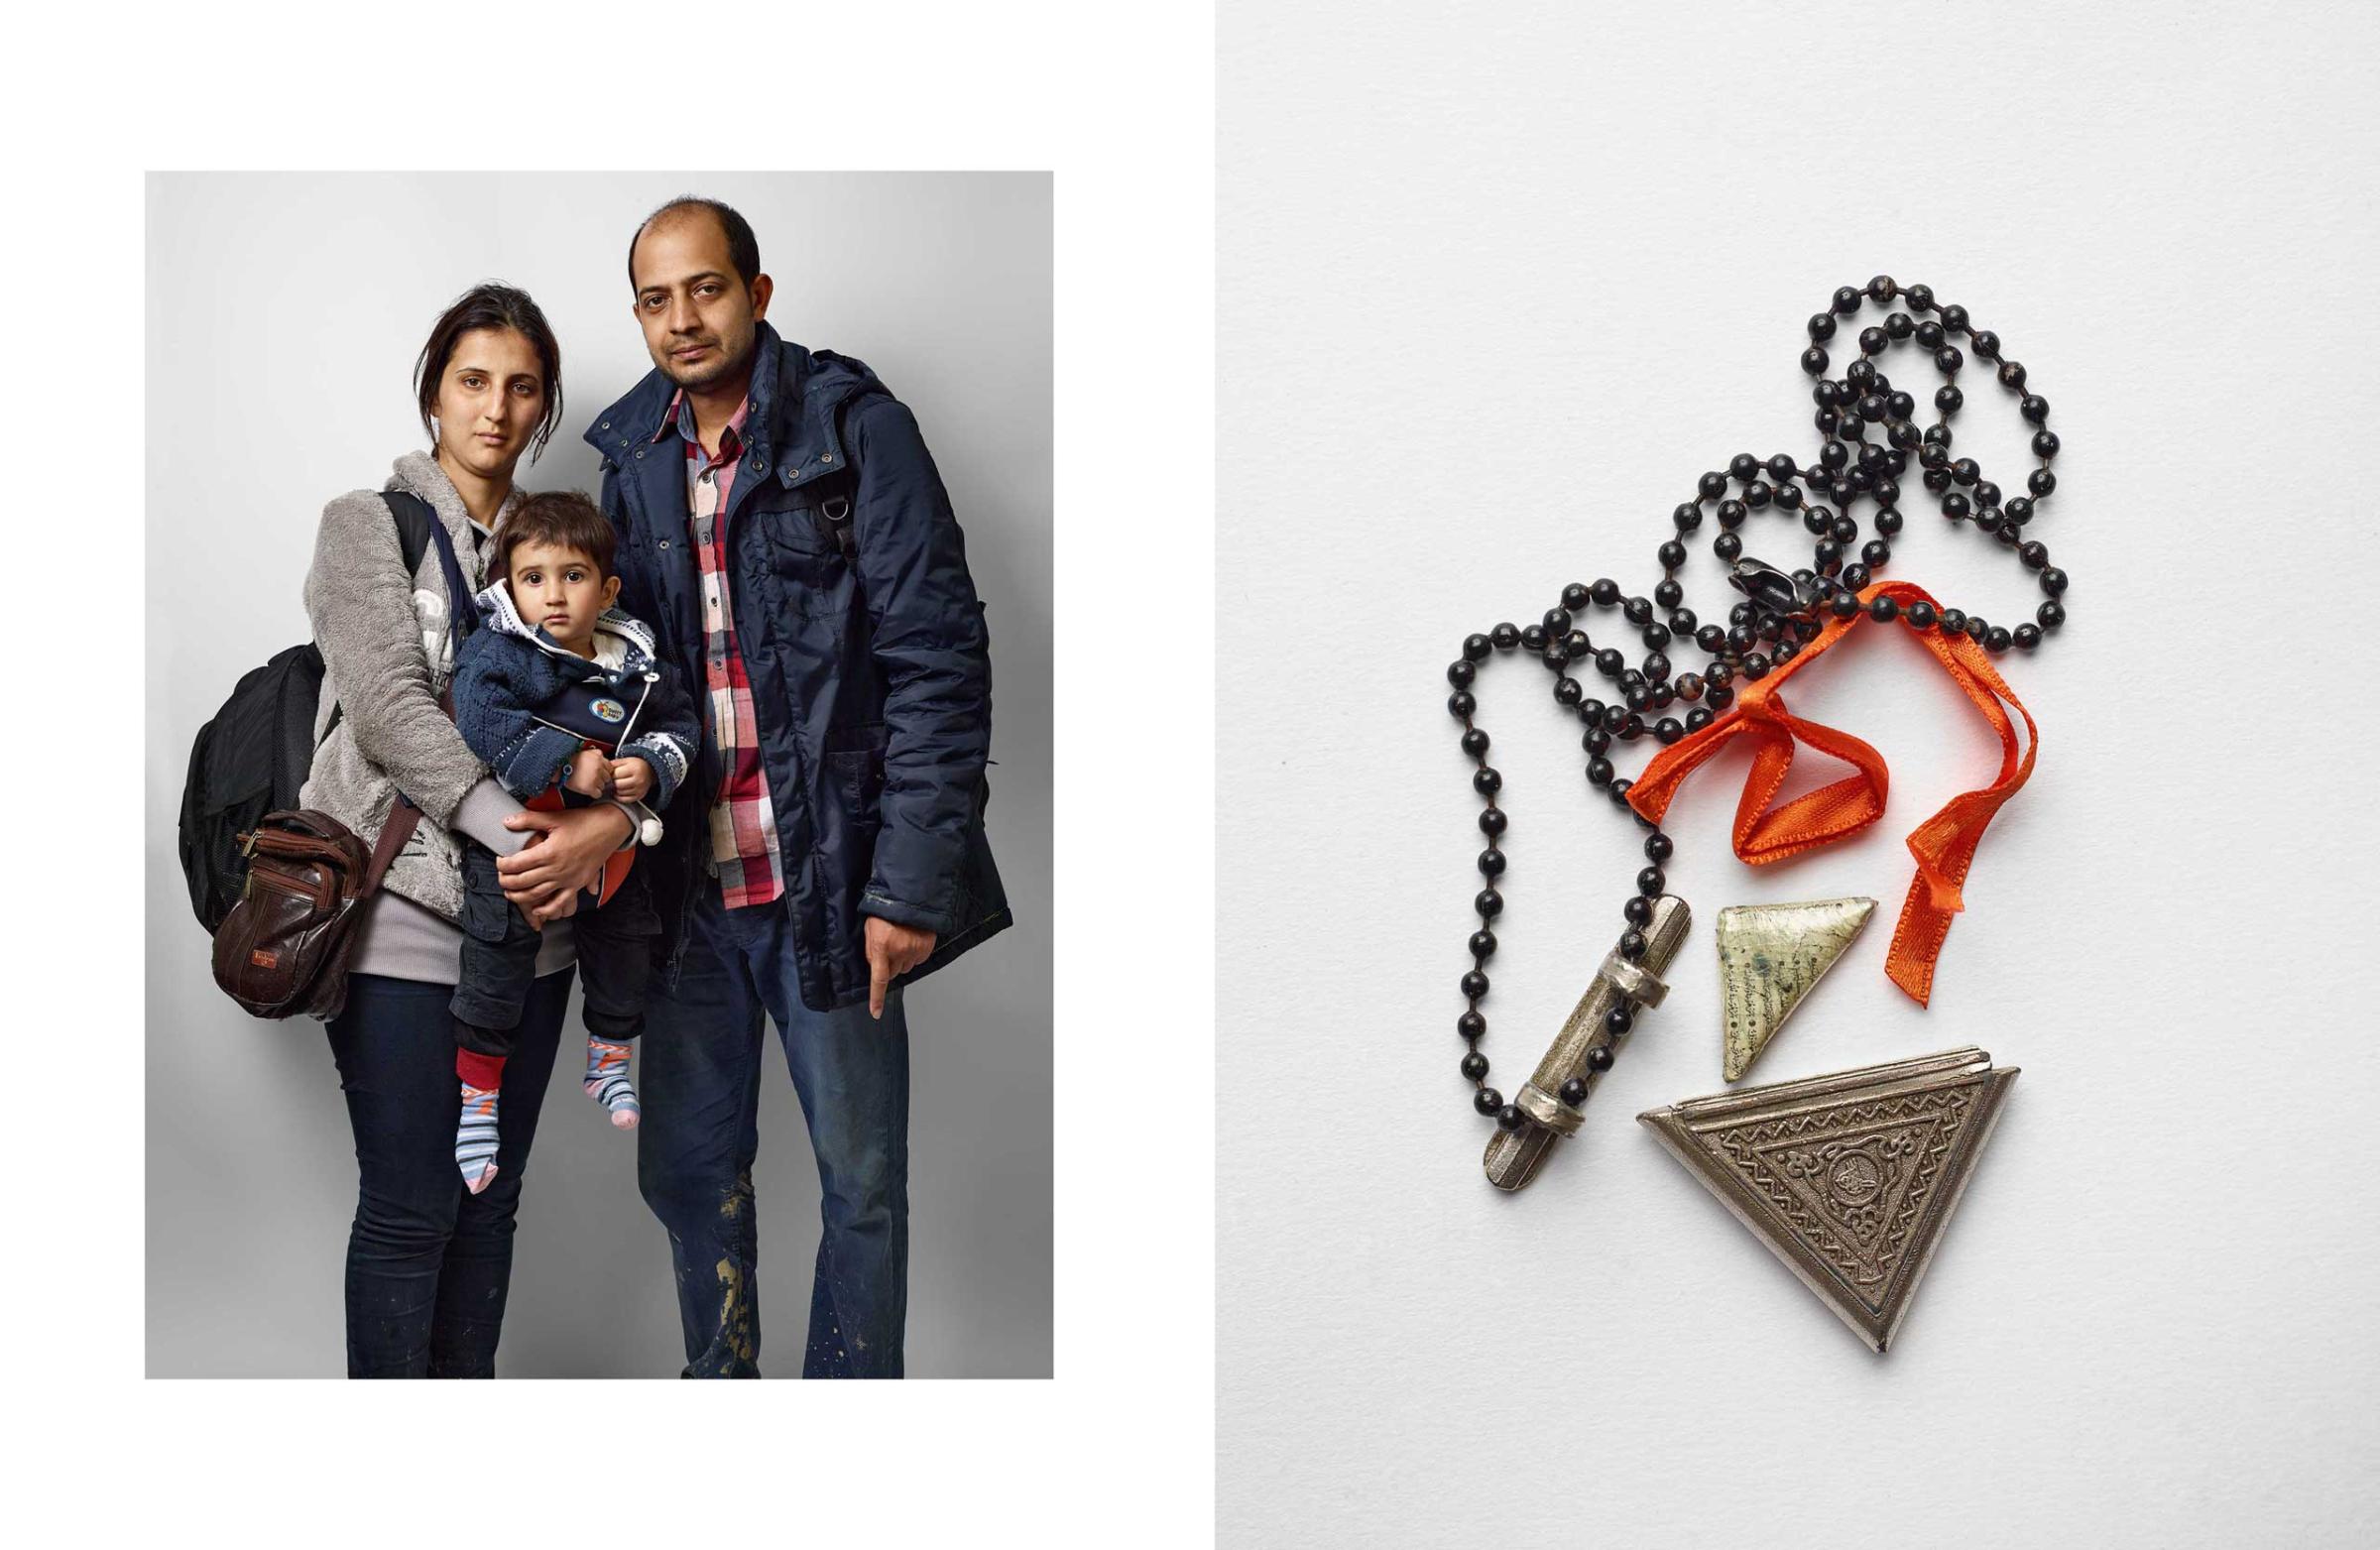 things-they-carried-refugees-nickelsdorf-james-mollison-09